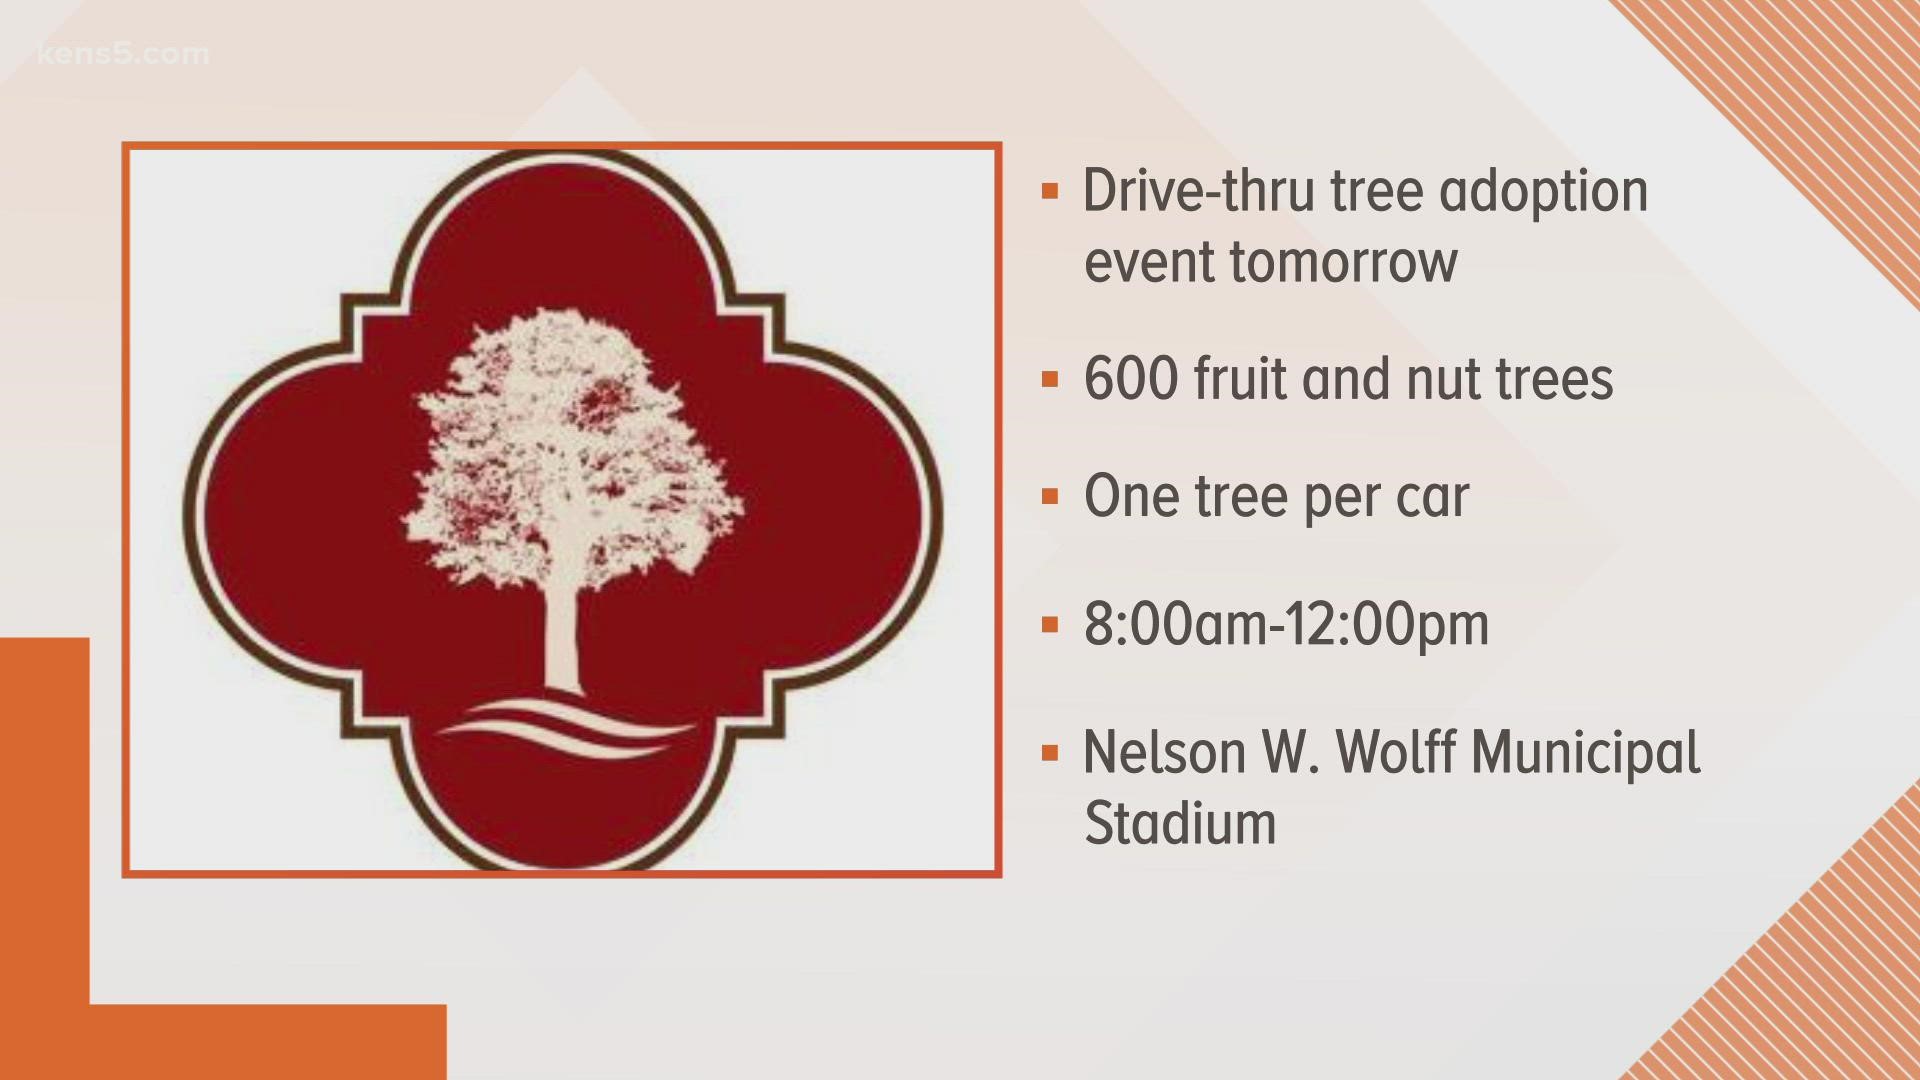 The City of San Antonio says 600 fruit and nut trees will be up for grabs!